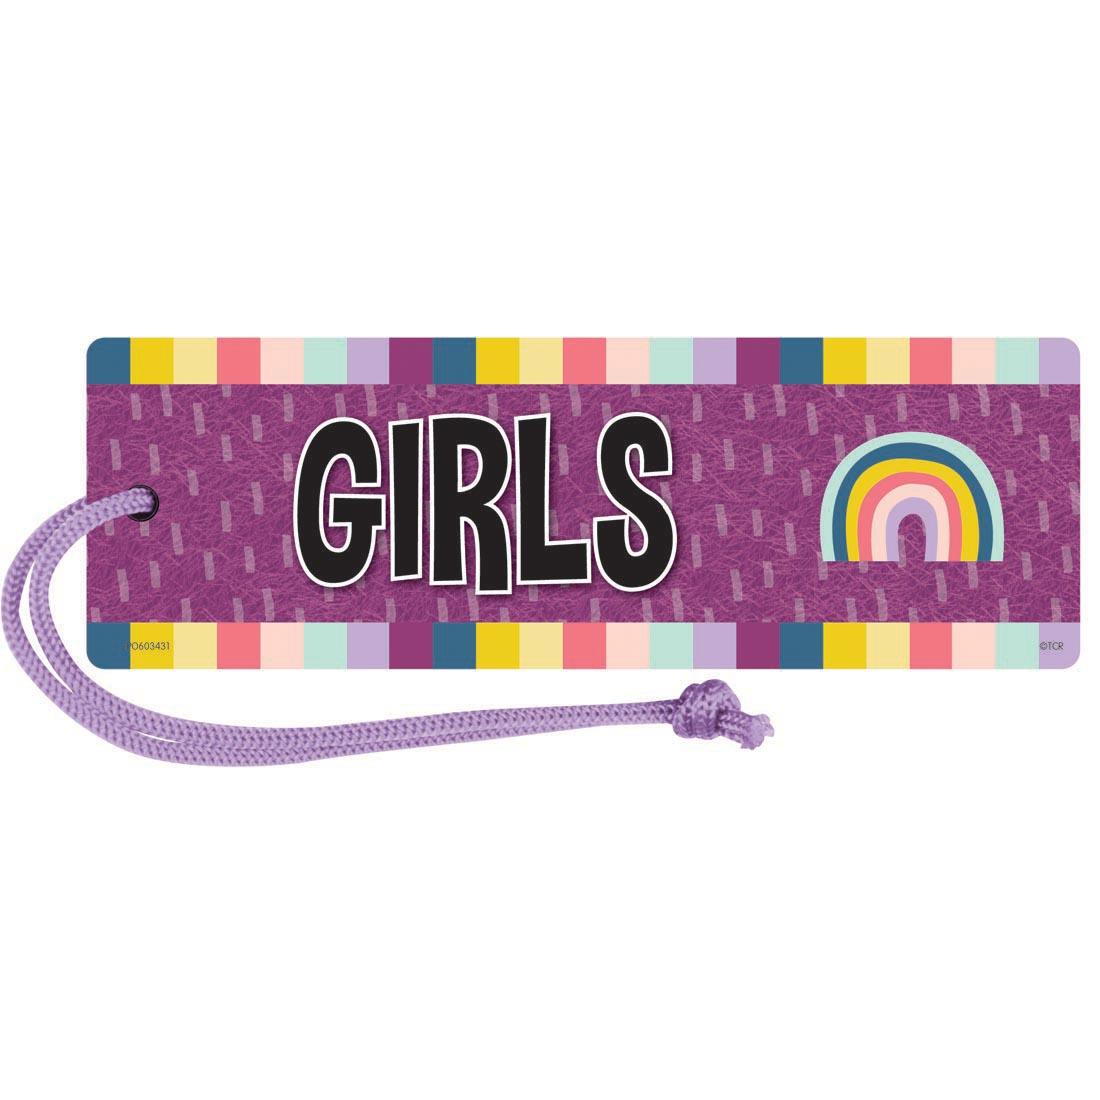 Magnetic Girls Pass from the Oh Happy Day collection by Teacher Created Resources